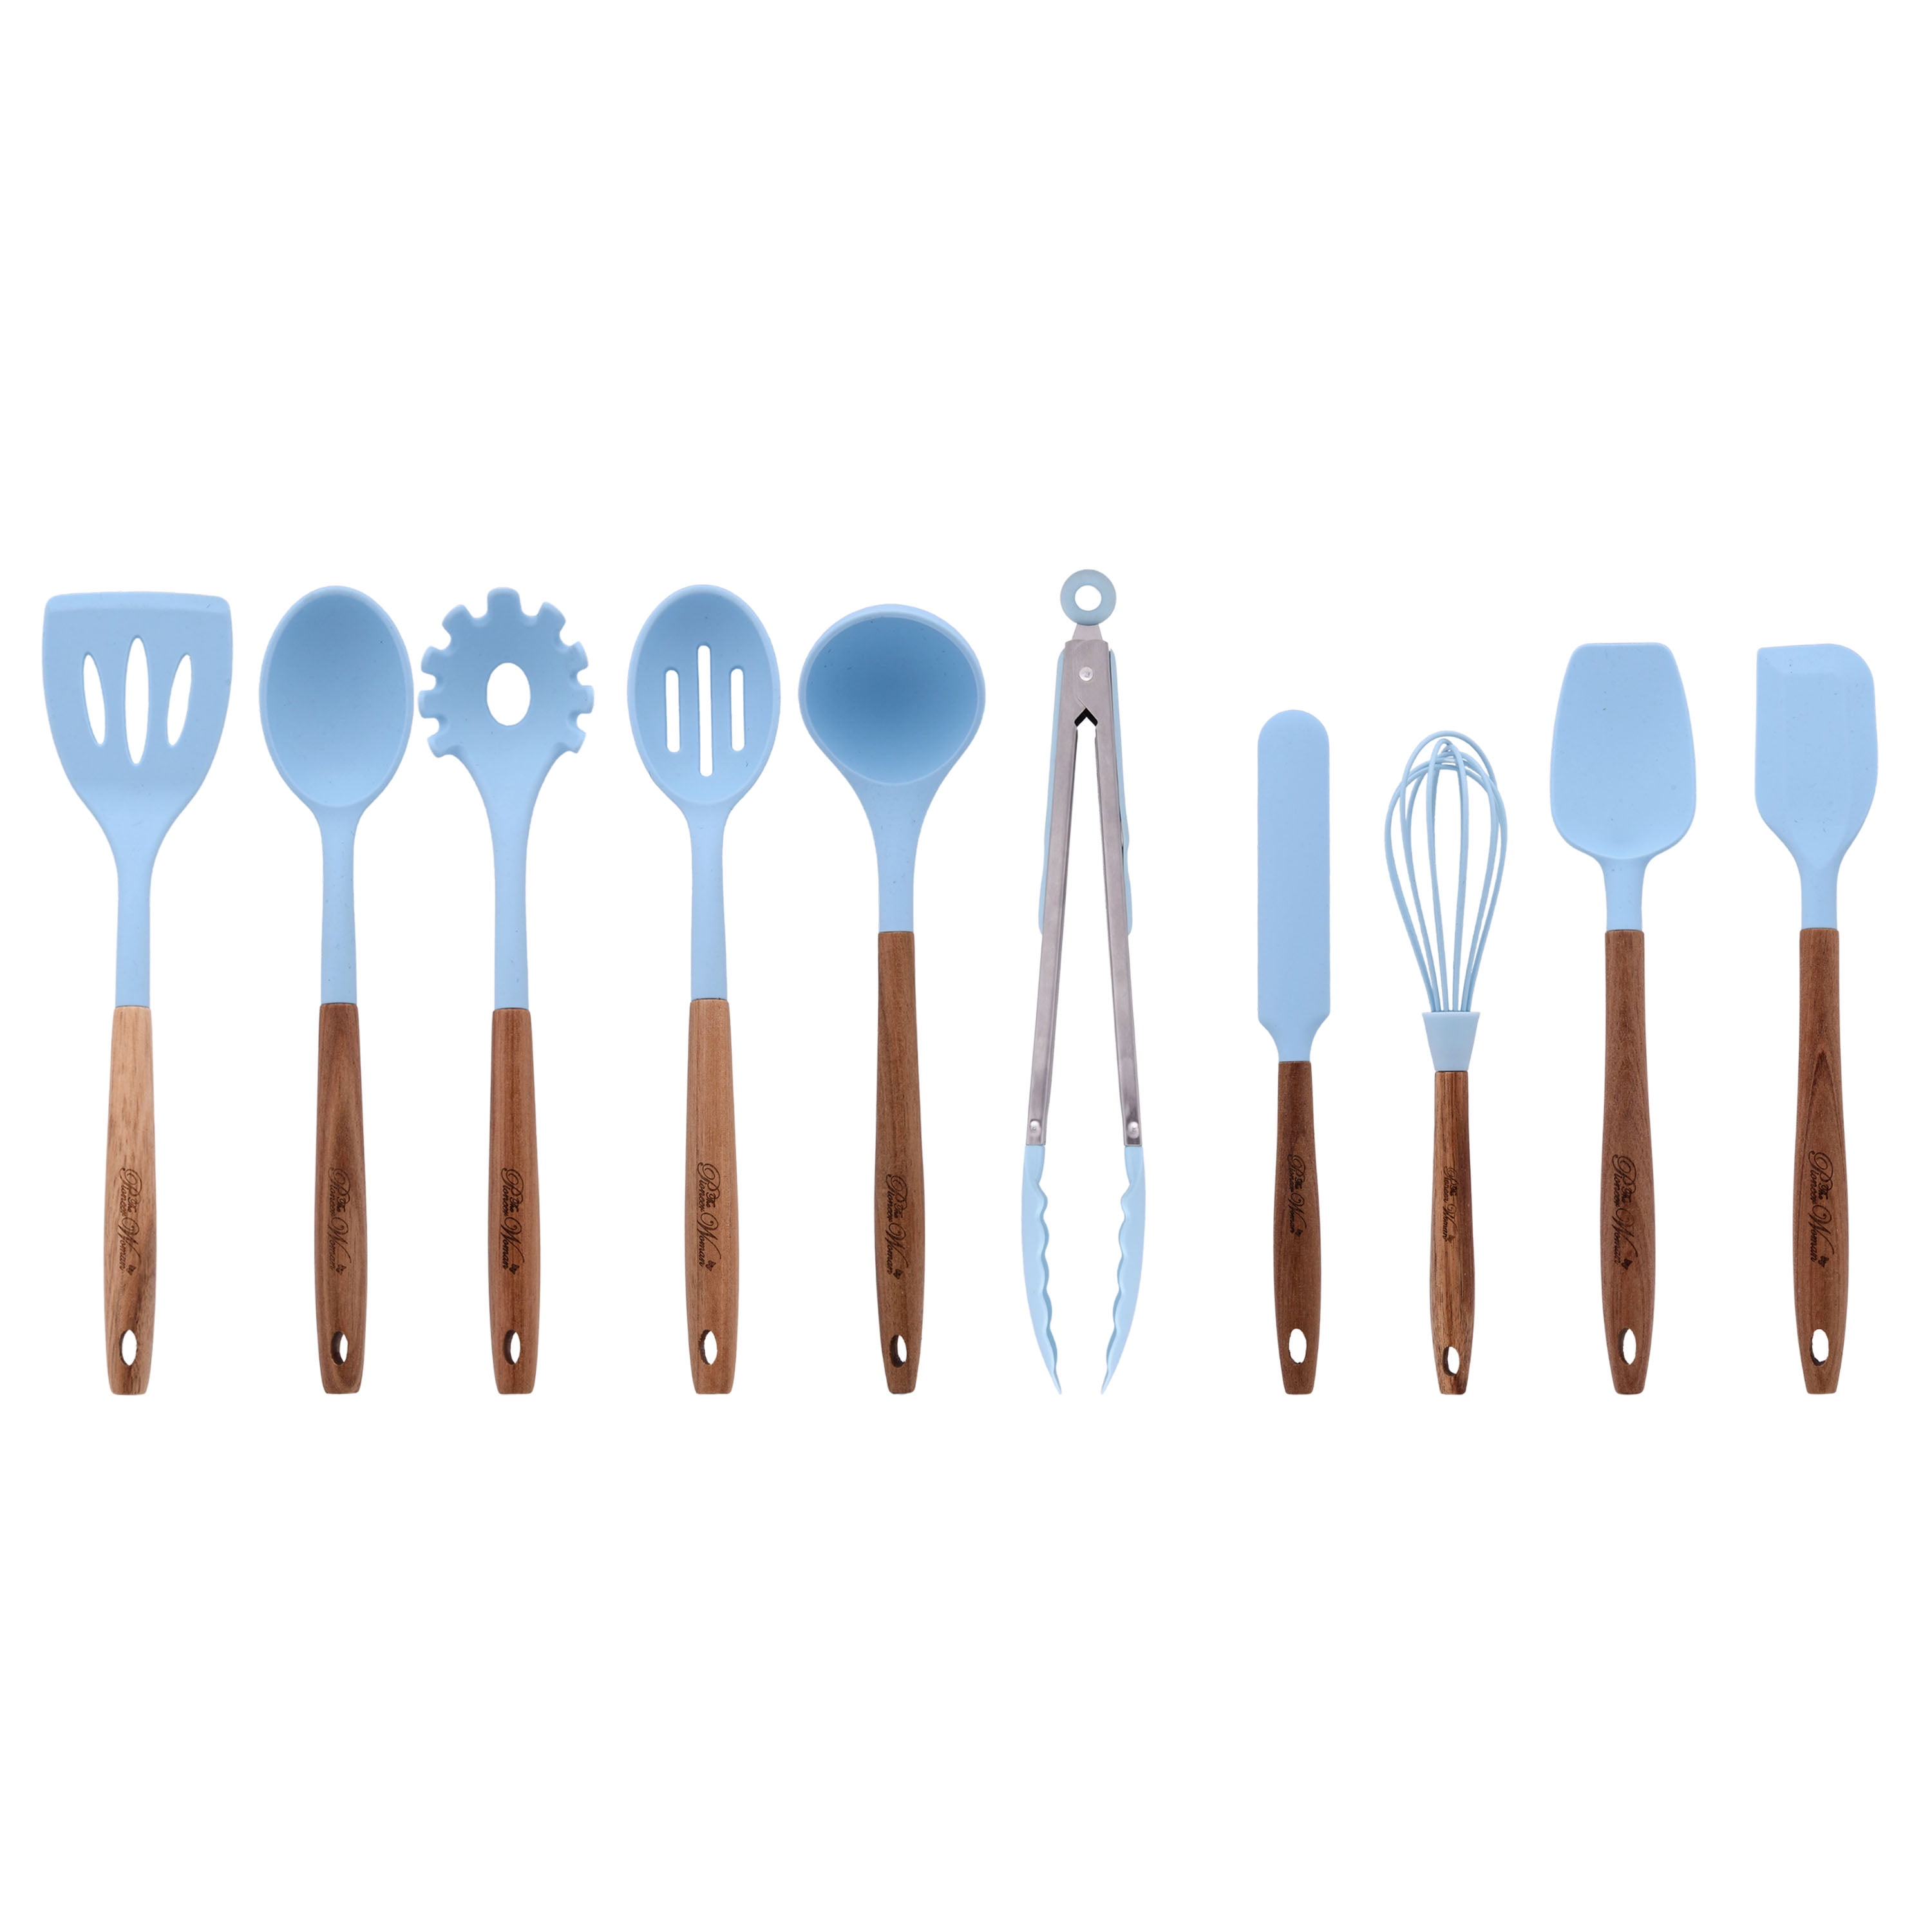 The Pioneer Woman Silicone Kitchen Utensils, 10 Piece Set, Blue, Wood  Handle NEW